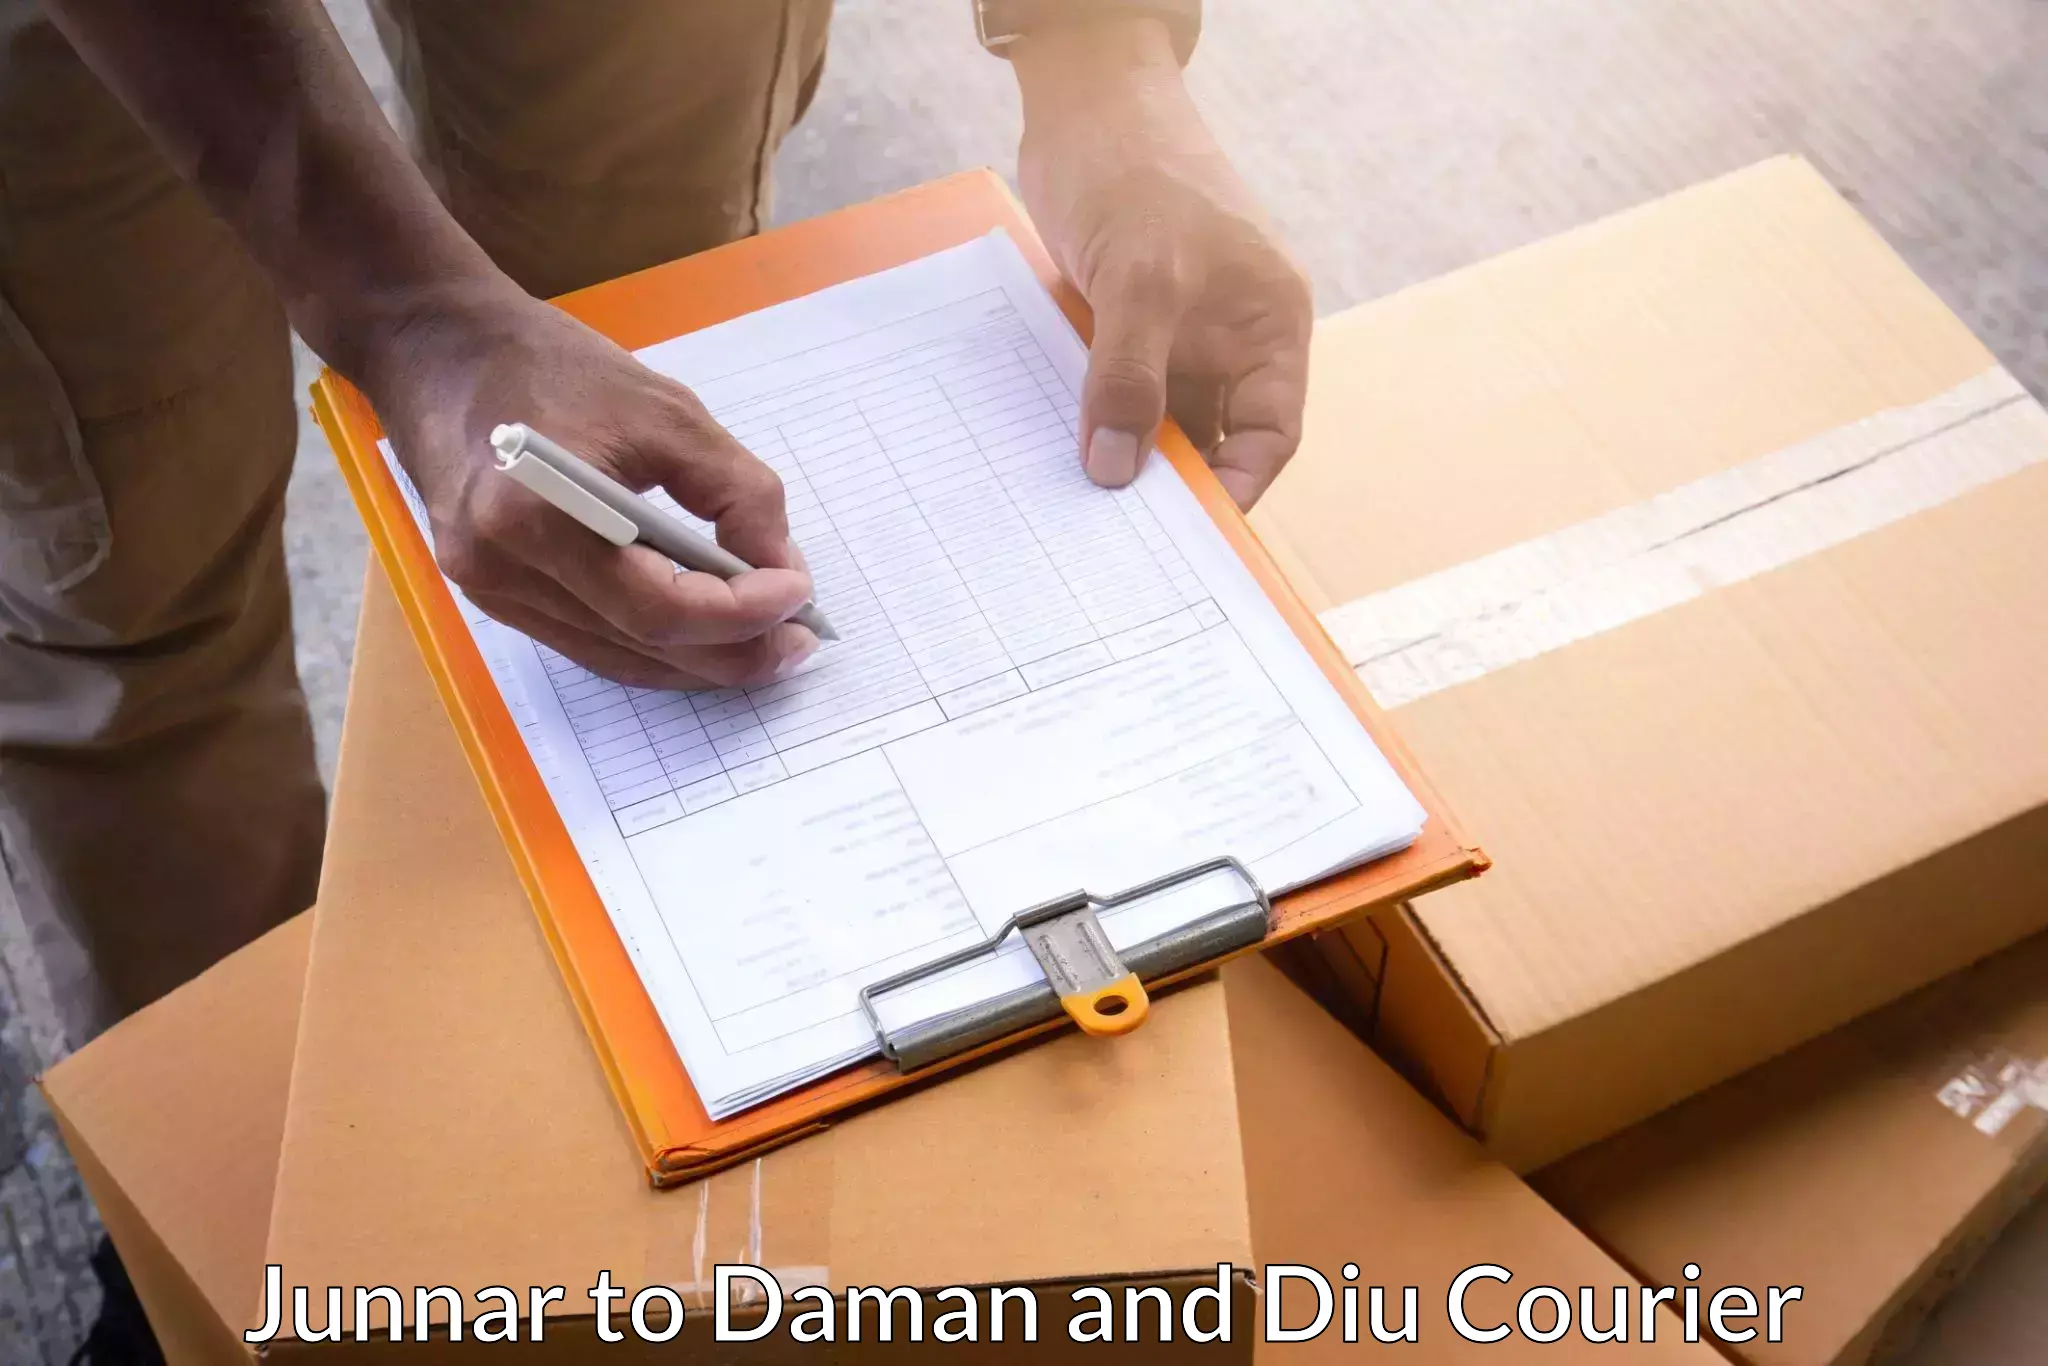 Fast delivery service in Junnar to Daman and Diu